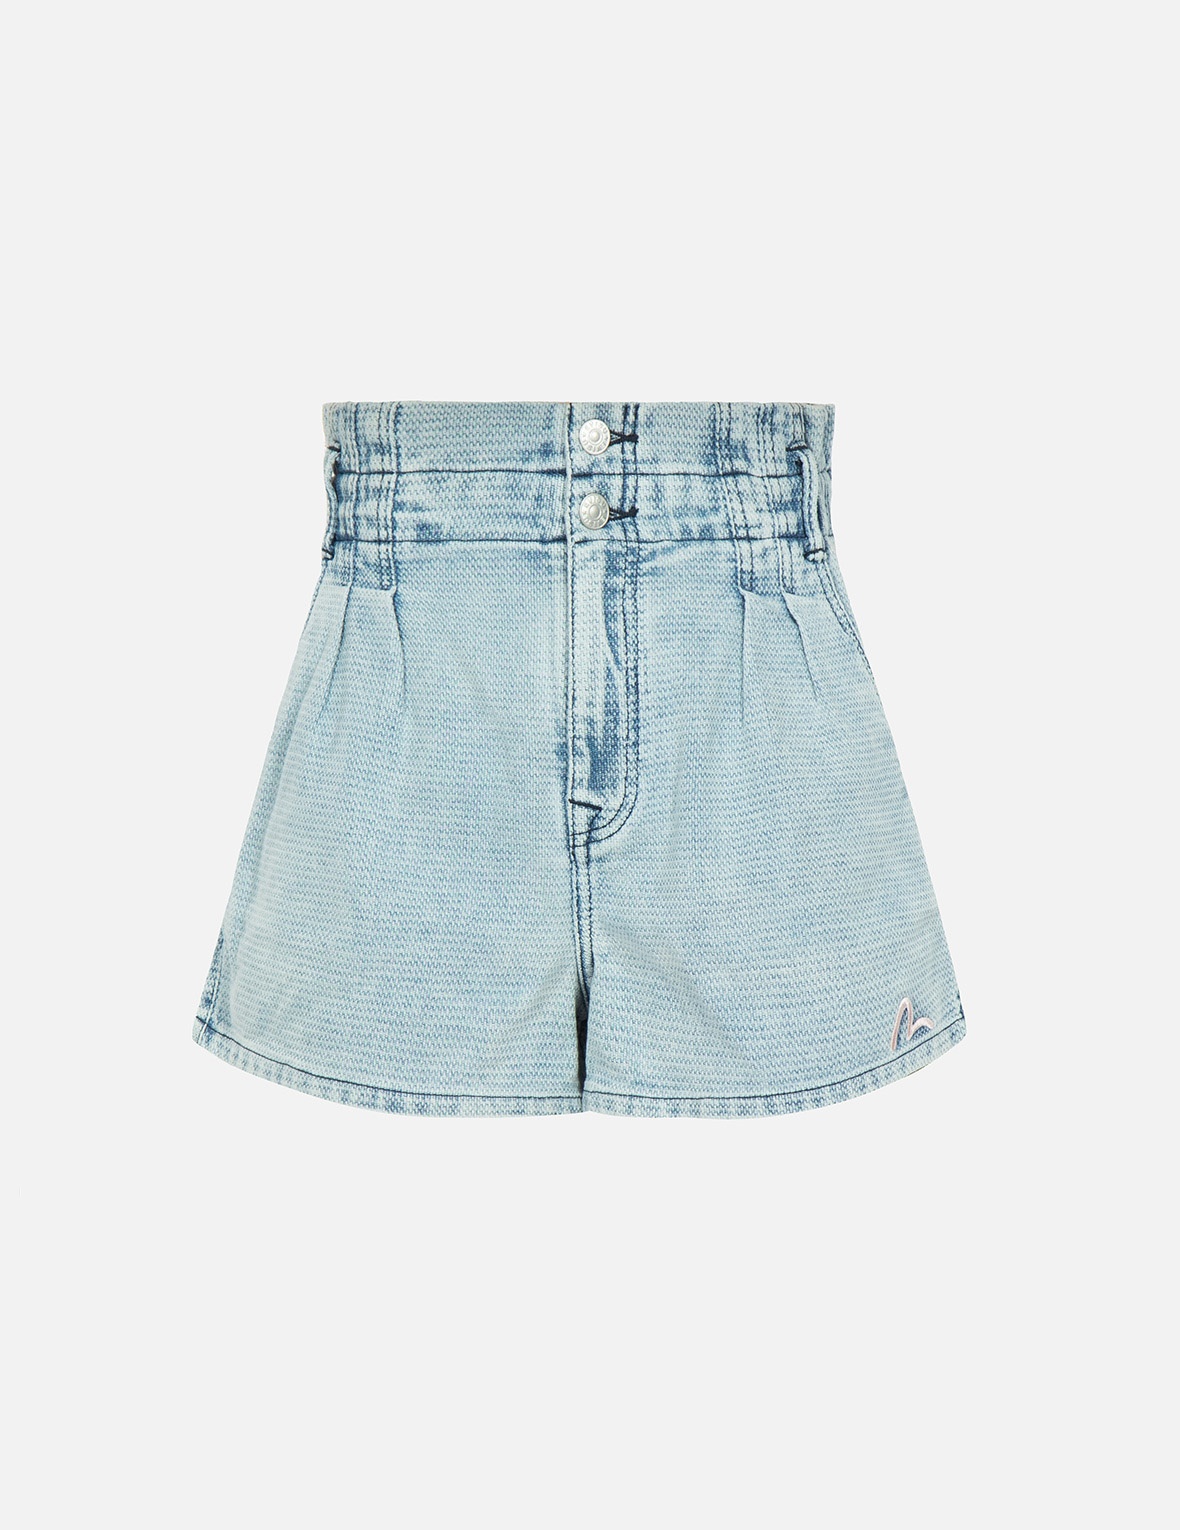 SEAGULL EMBROIDERY TEXTURED JACQUARD DENIM SHORTS - 1